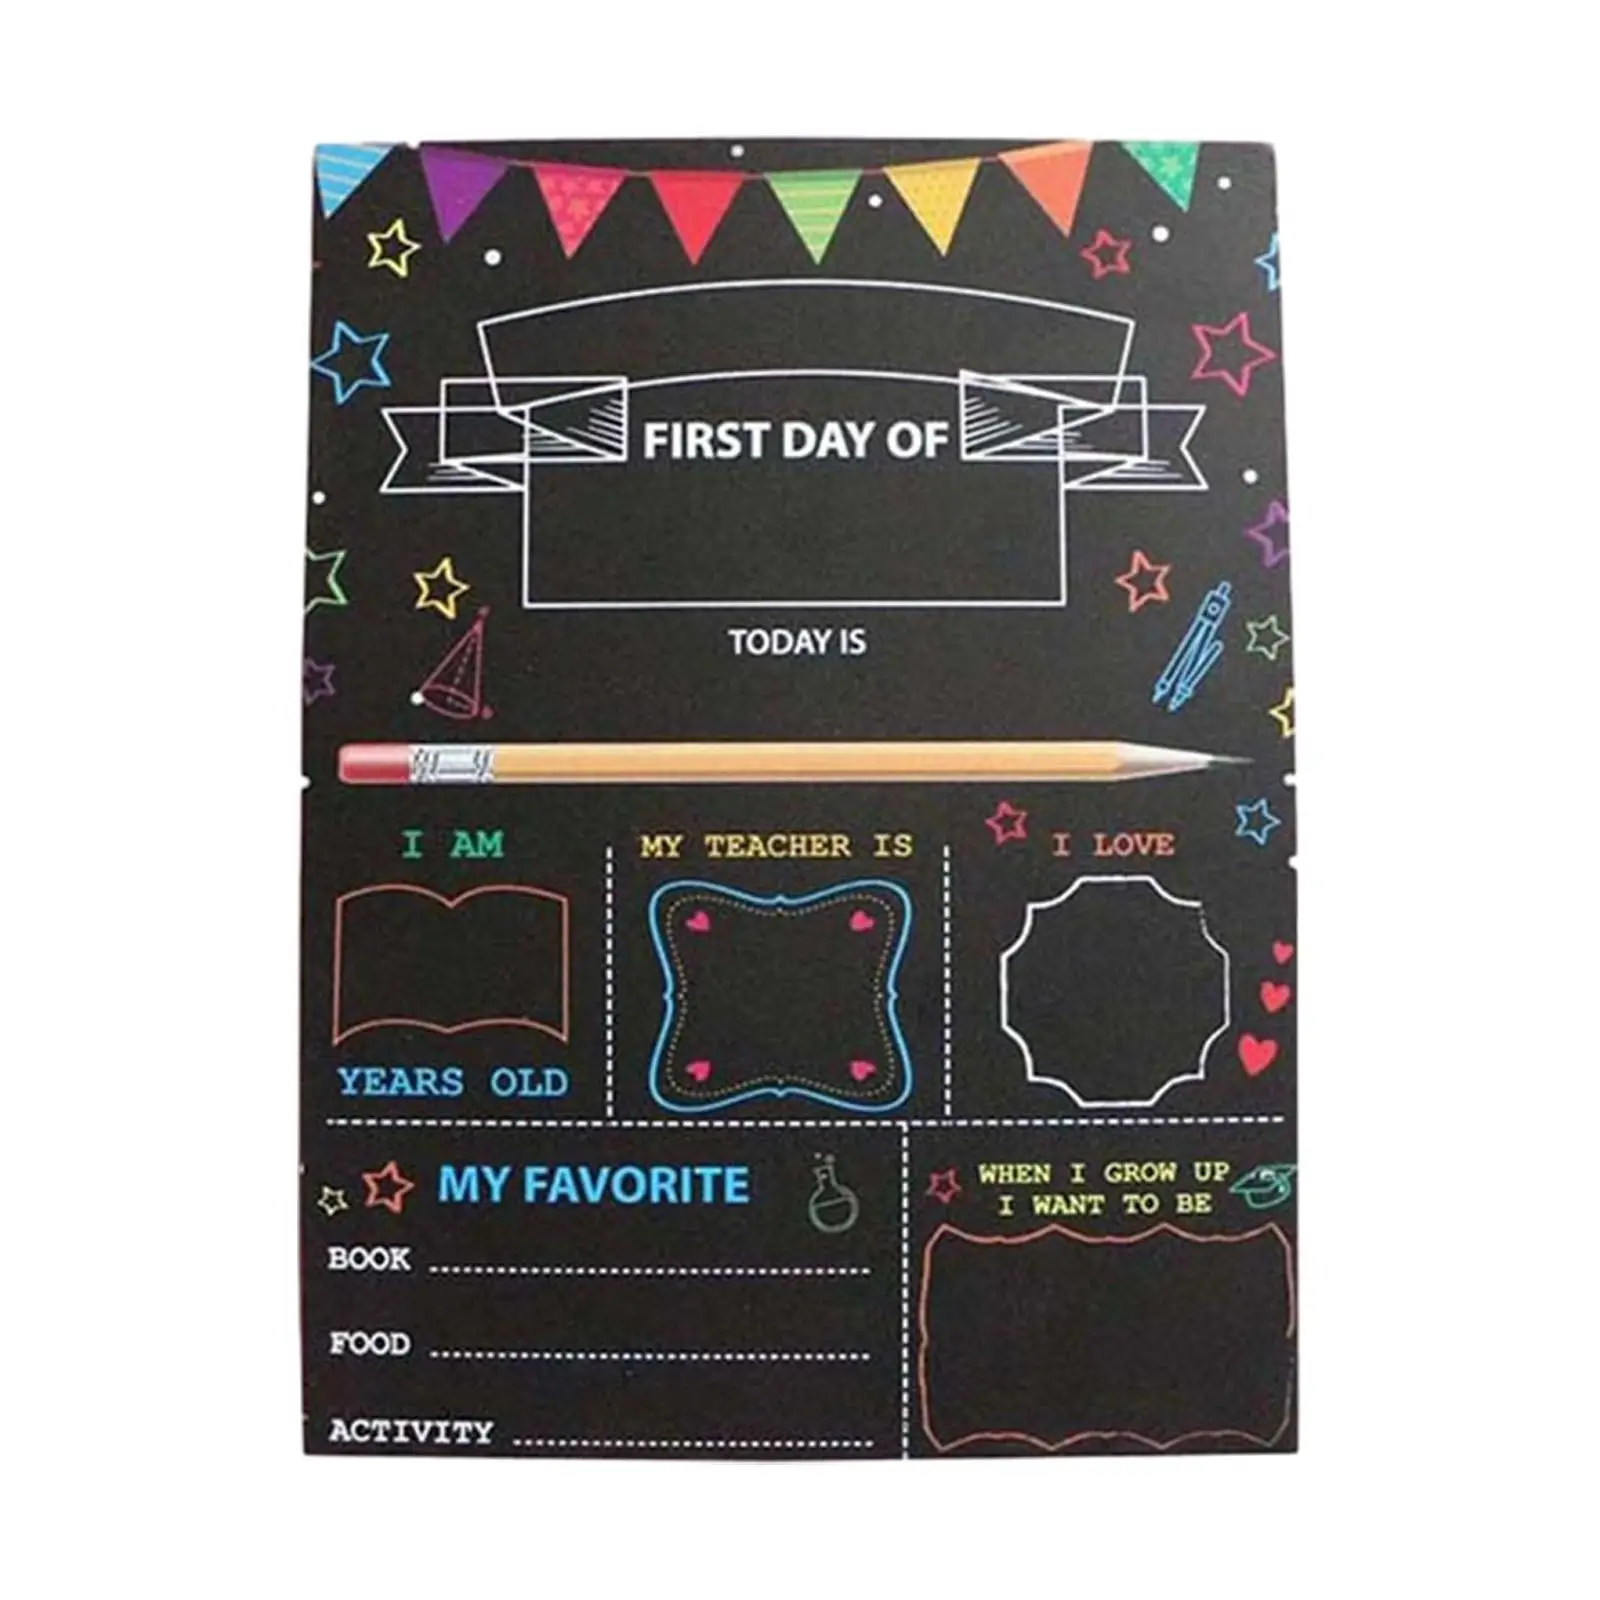 First Day of School Board Sign Double Sided 30.5x22.5cm Easy to Clean Portable Office Reception Nursery Milestone Chalkboard